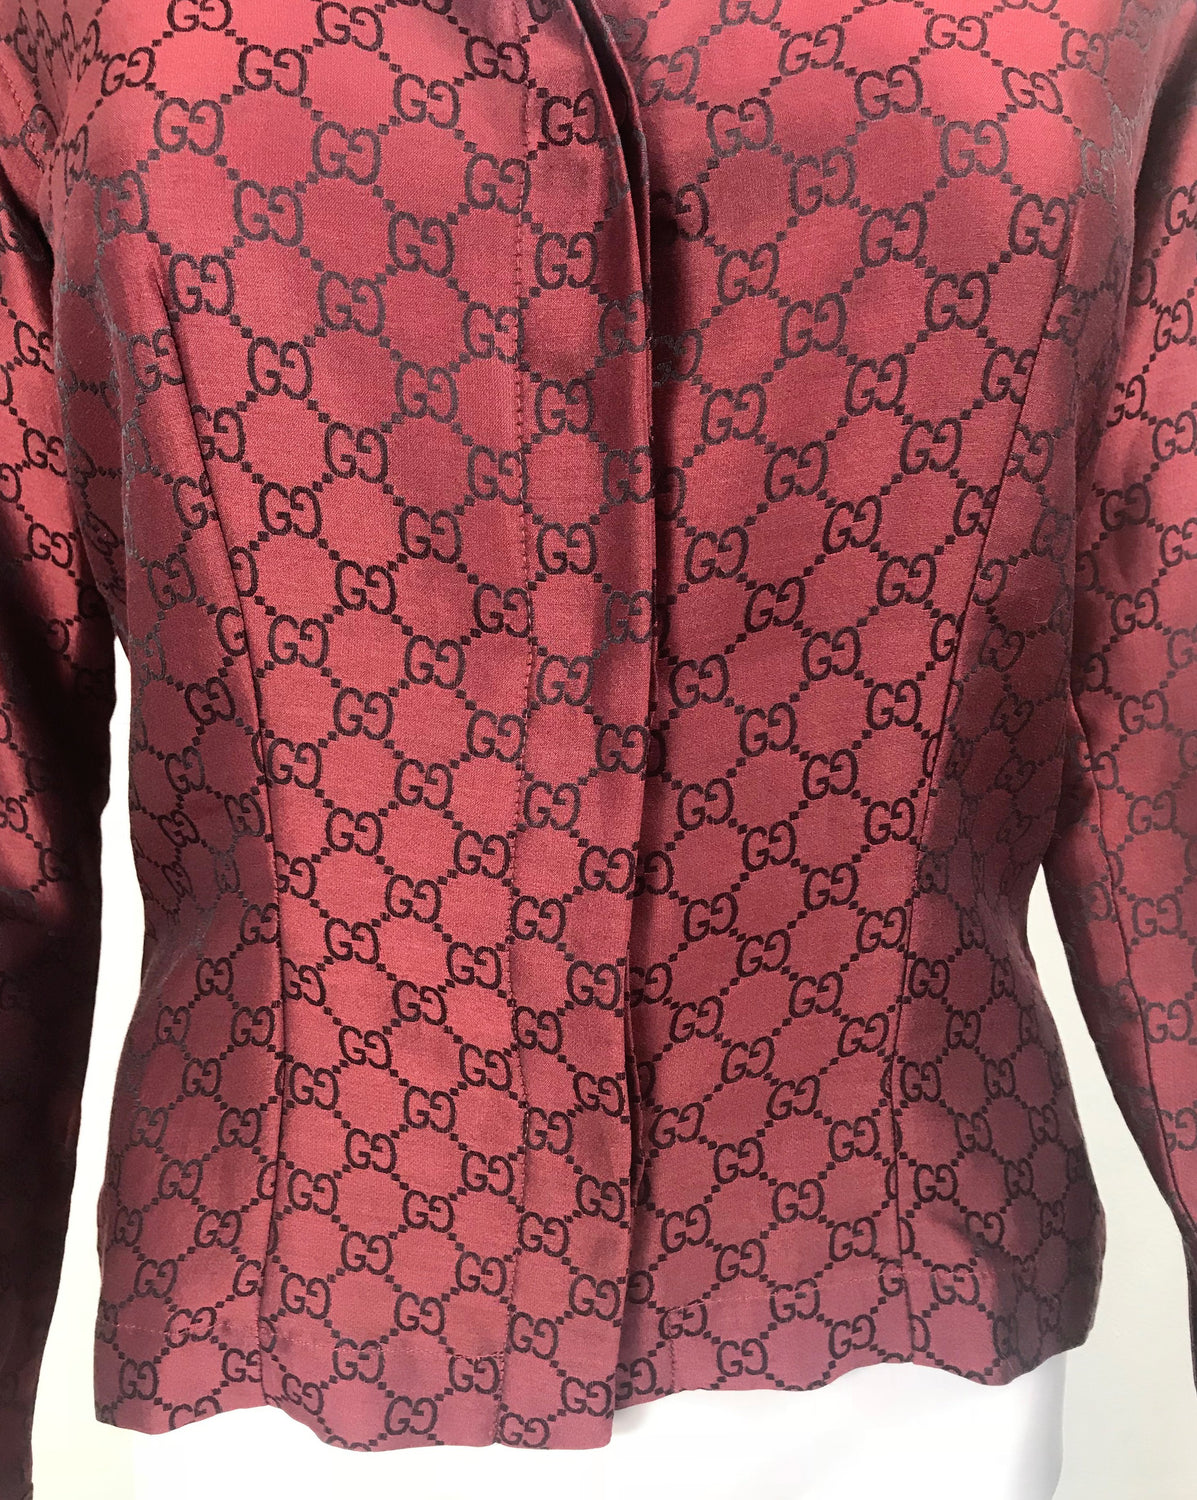 FRUIT vintage Gucci silk shirt designed by Tom Ford dating to the late 1990s. It features a classic Gucci monogram logo print all over in red/black contrast print and a tailored fitted shape.